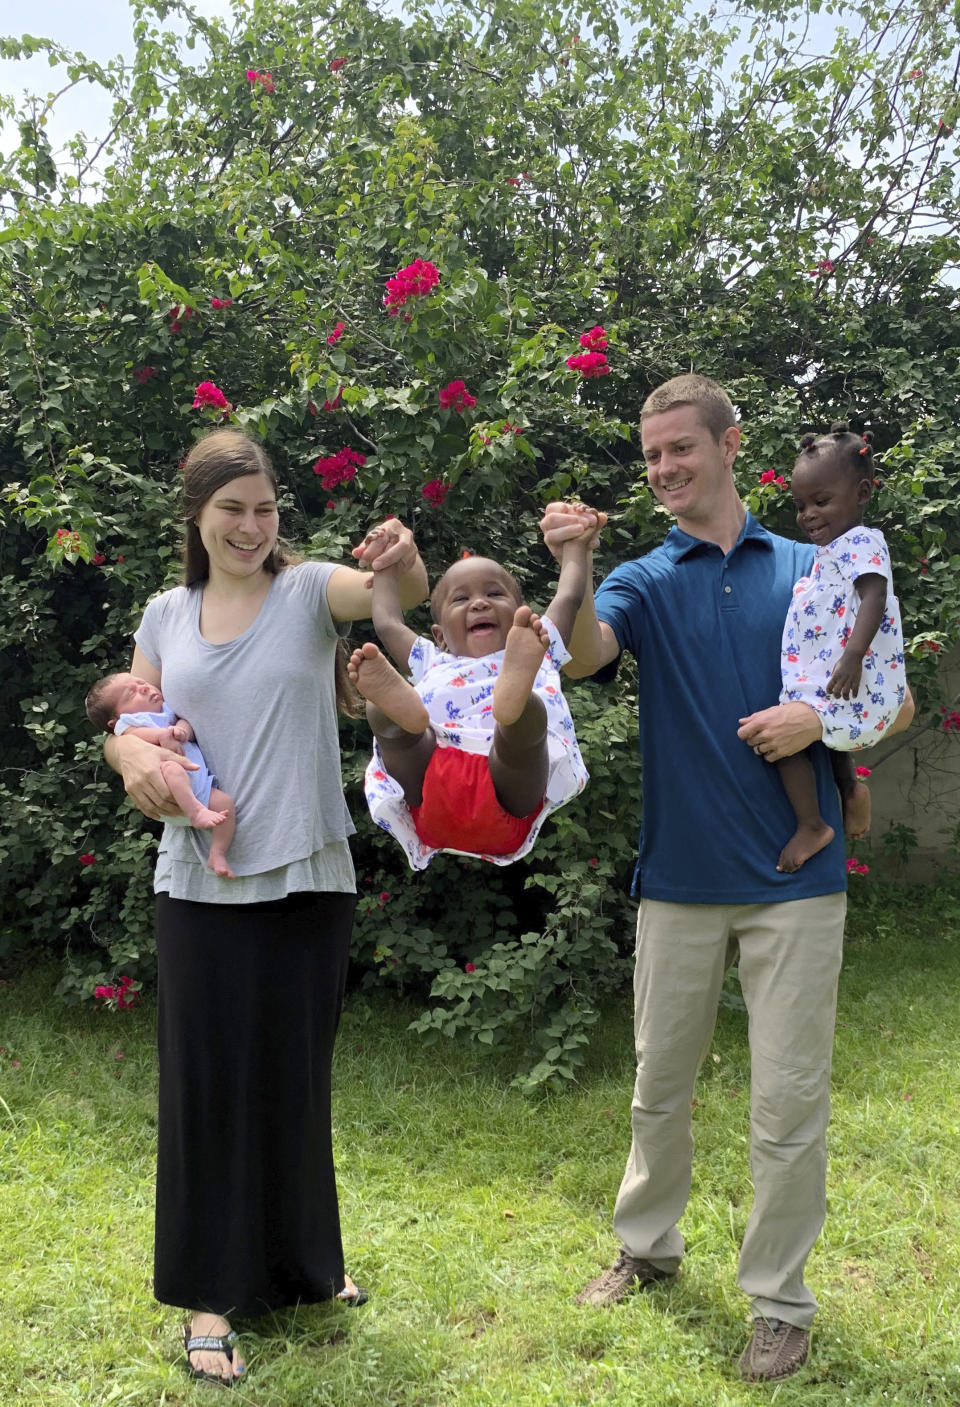 This Sept. 21, 2019 family photo shows Michaela Parker holding her newborn son, Philip; adopted twin daughters Ariella, center, and Claira, right, and father, David Parker, in N'Djamena, Chad. Amid the 2020 coronavirus outbreak, the Parkers are stranded in Yaounde, Cameroon, waiting for the U.S. embassy to issue visas for the twin girls they adopted in Chad in November 2018. (Courtesy David Parker via AP)